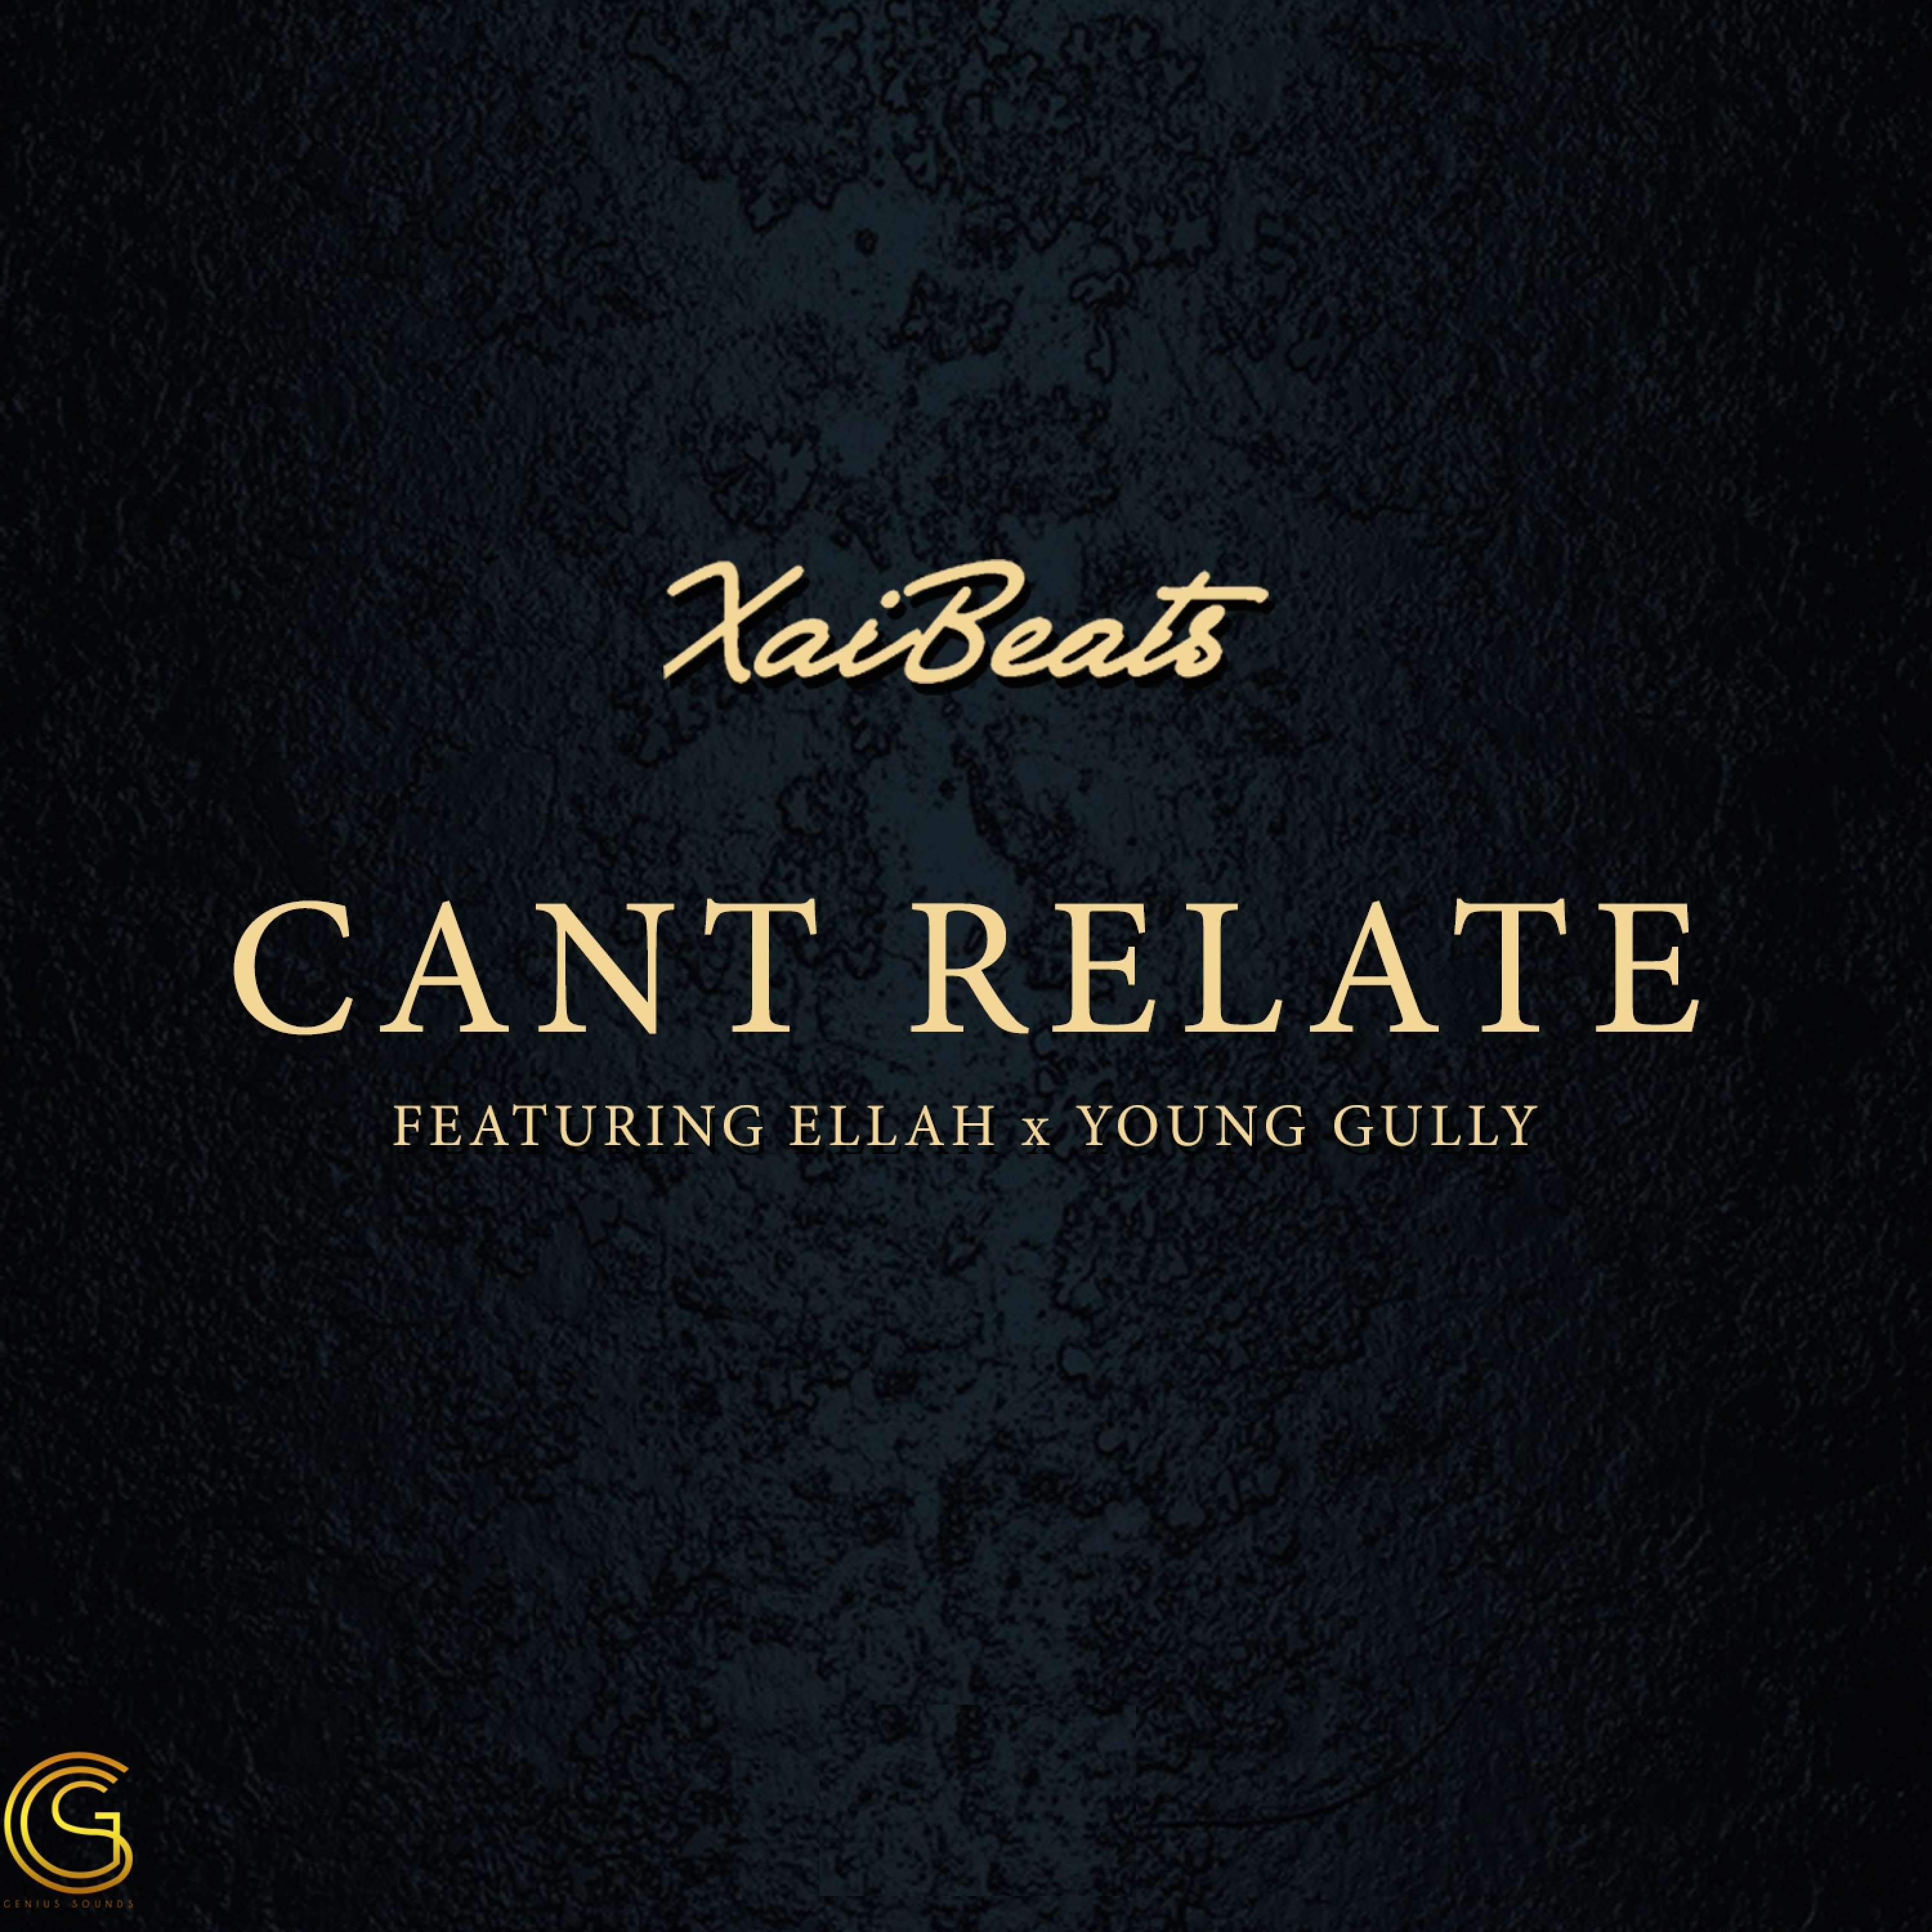 Can't Relate (feat. Ellah & Young Gully)